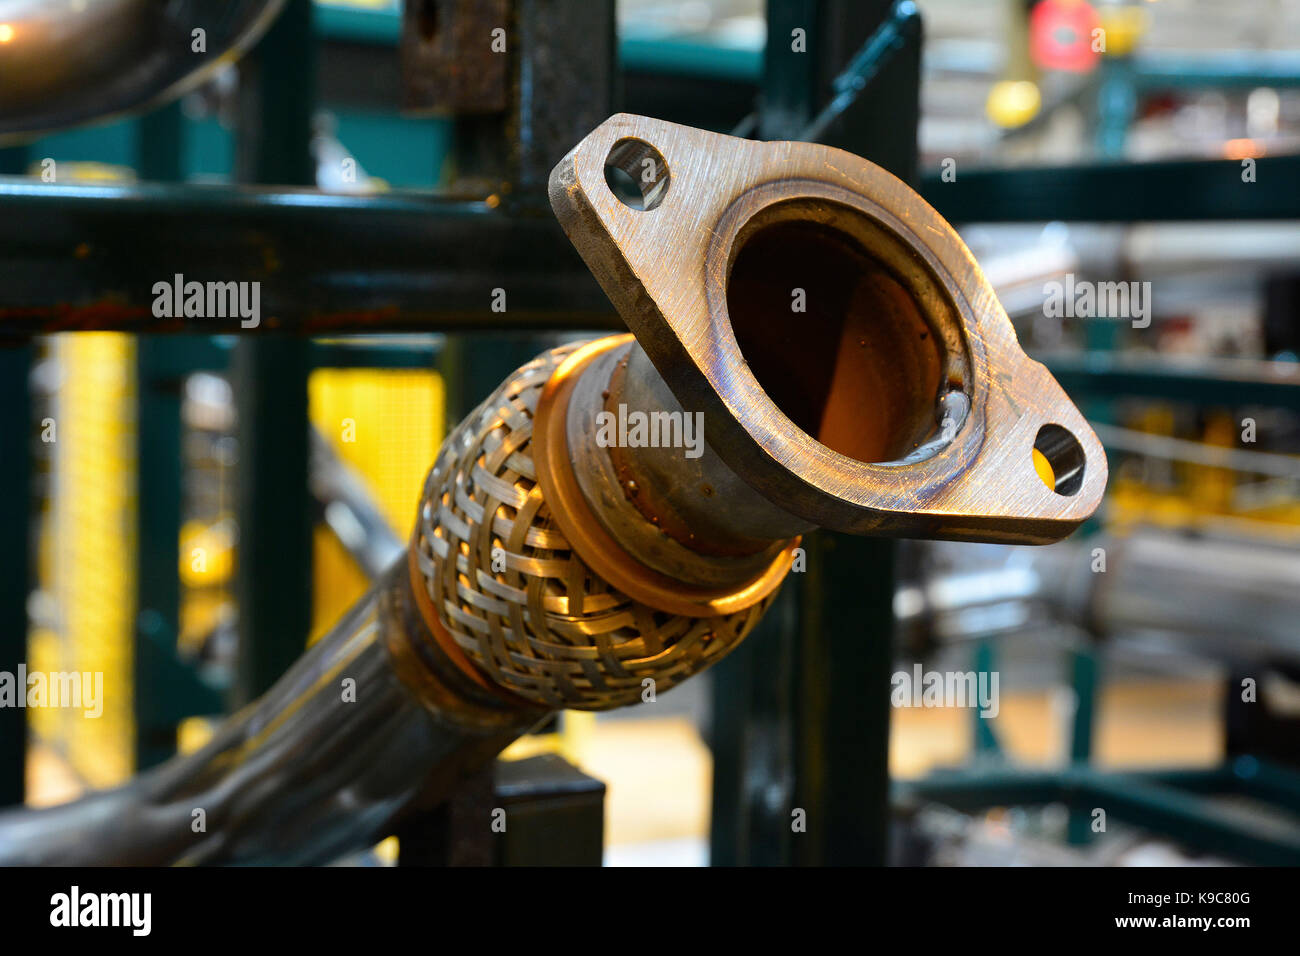 Exhaust pipes on the assembly line at Jaguar Land Rover, Lode Lane, Solihull, West Midlands,UK. Stock Photo